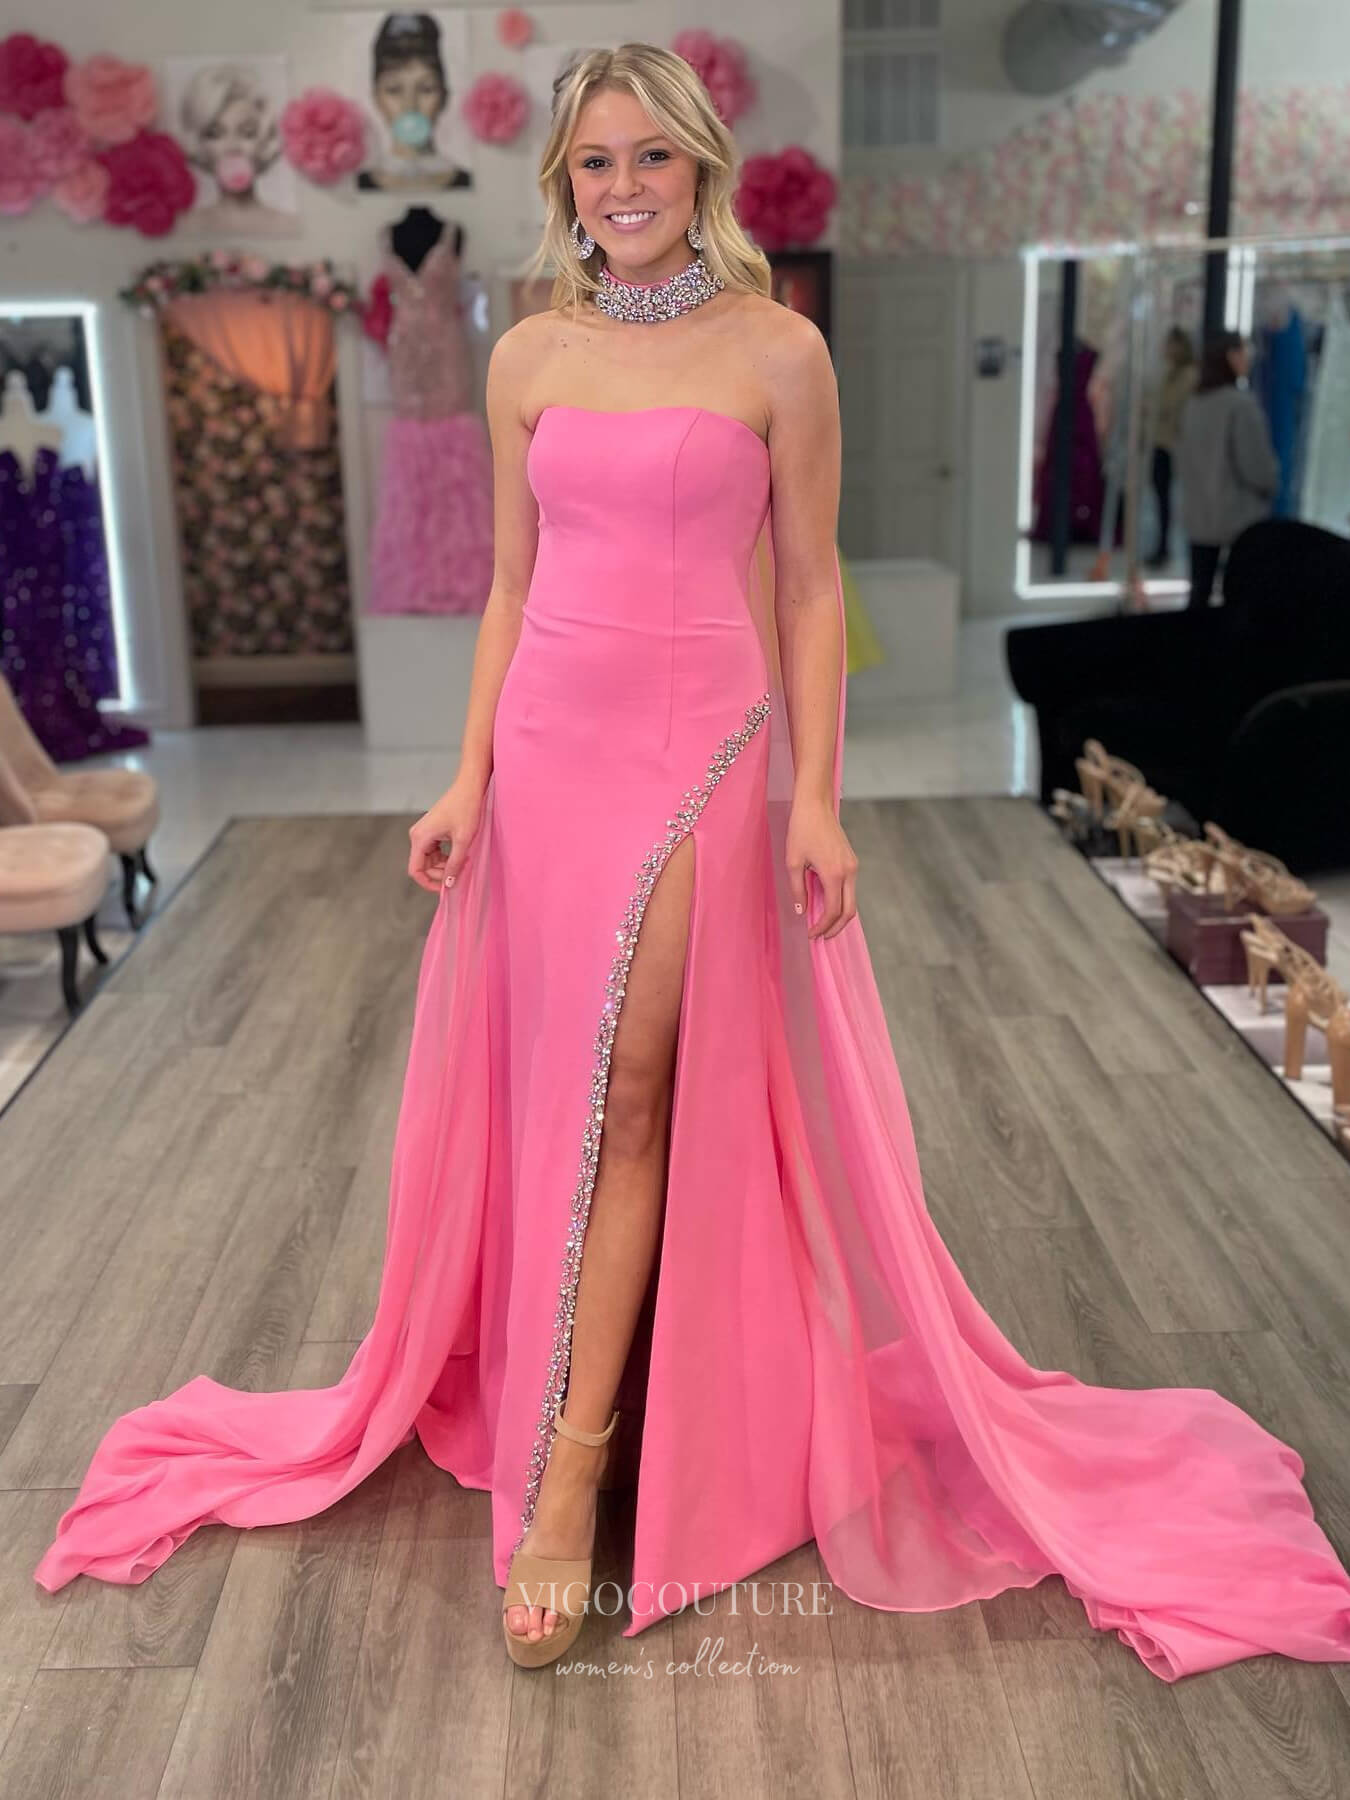 Pink Cape Sleeve Strapless Prom Dresses with Beaded Slit Satin Mermaid 24170-Prom Dresses-vigocouture-Pink-Custom Size-vigocouture